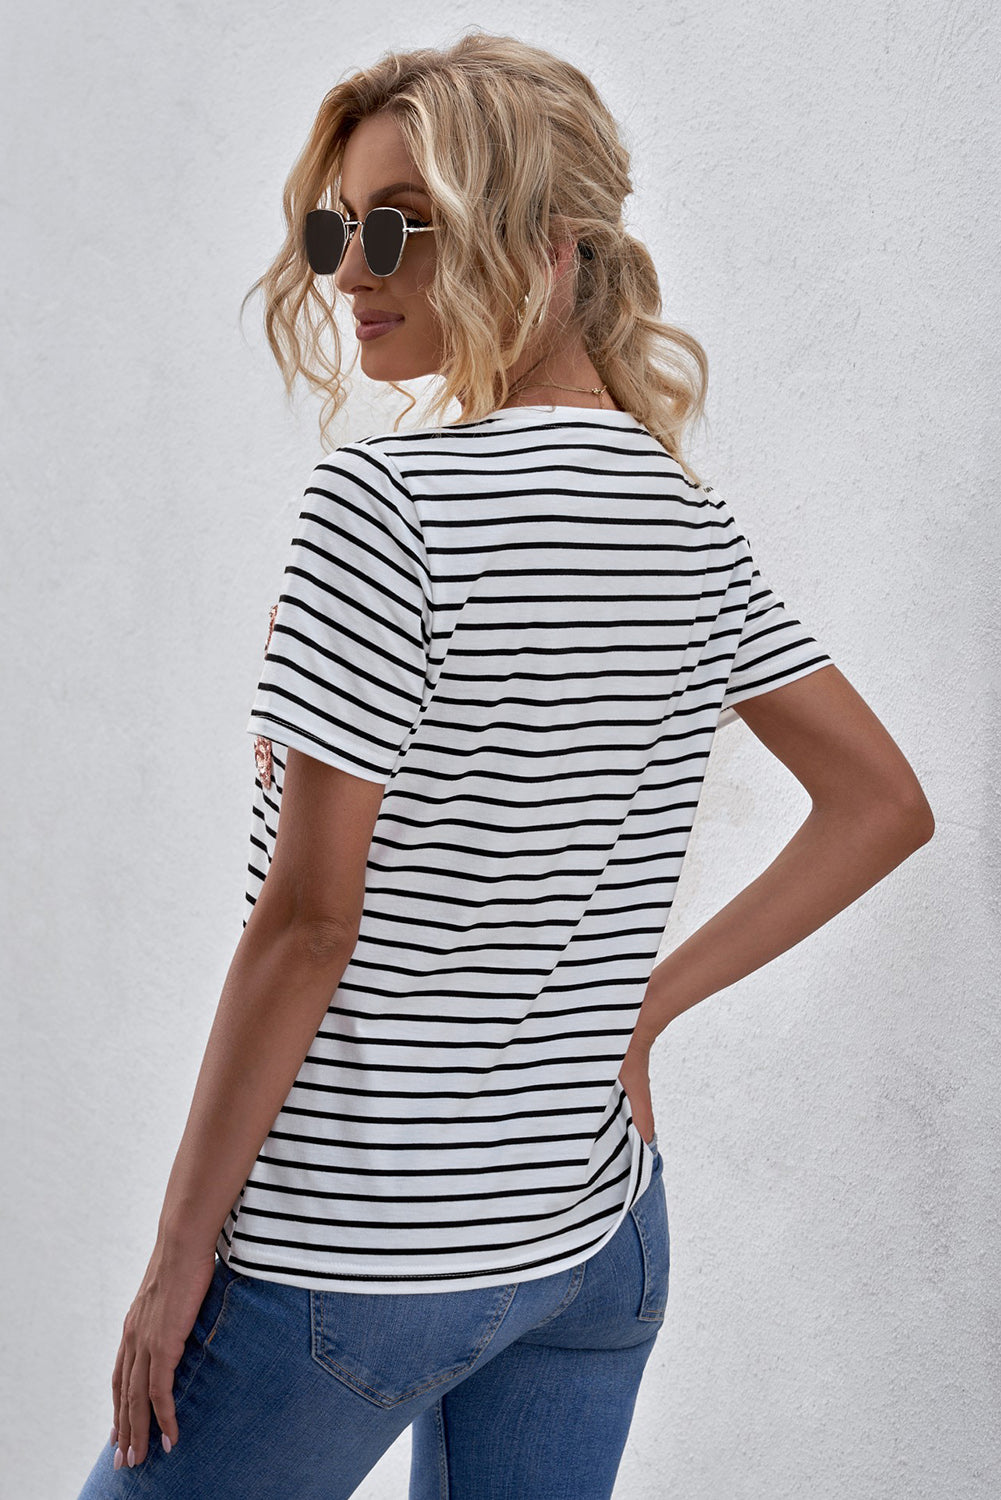 Women's Short Sleeve V Neck White Striped T-shirt with Patch Pocket